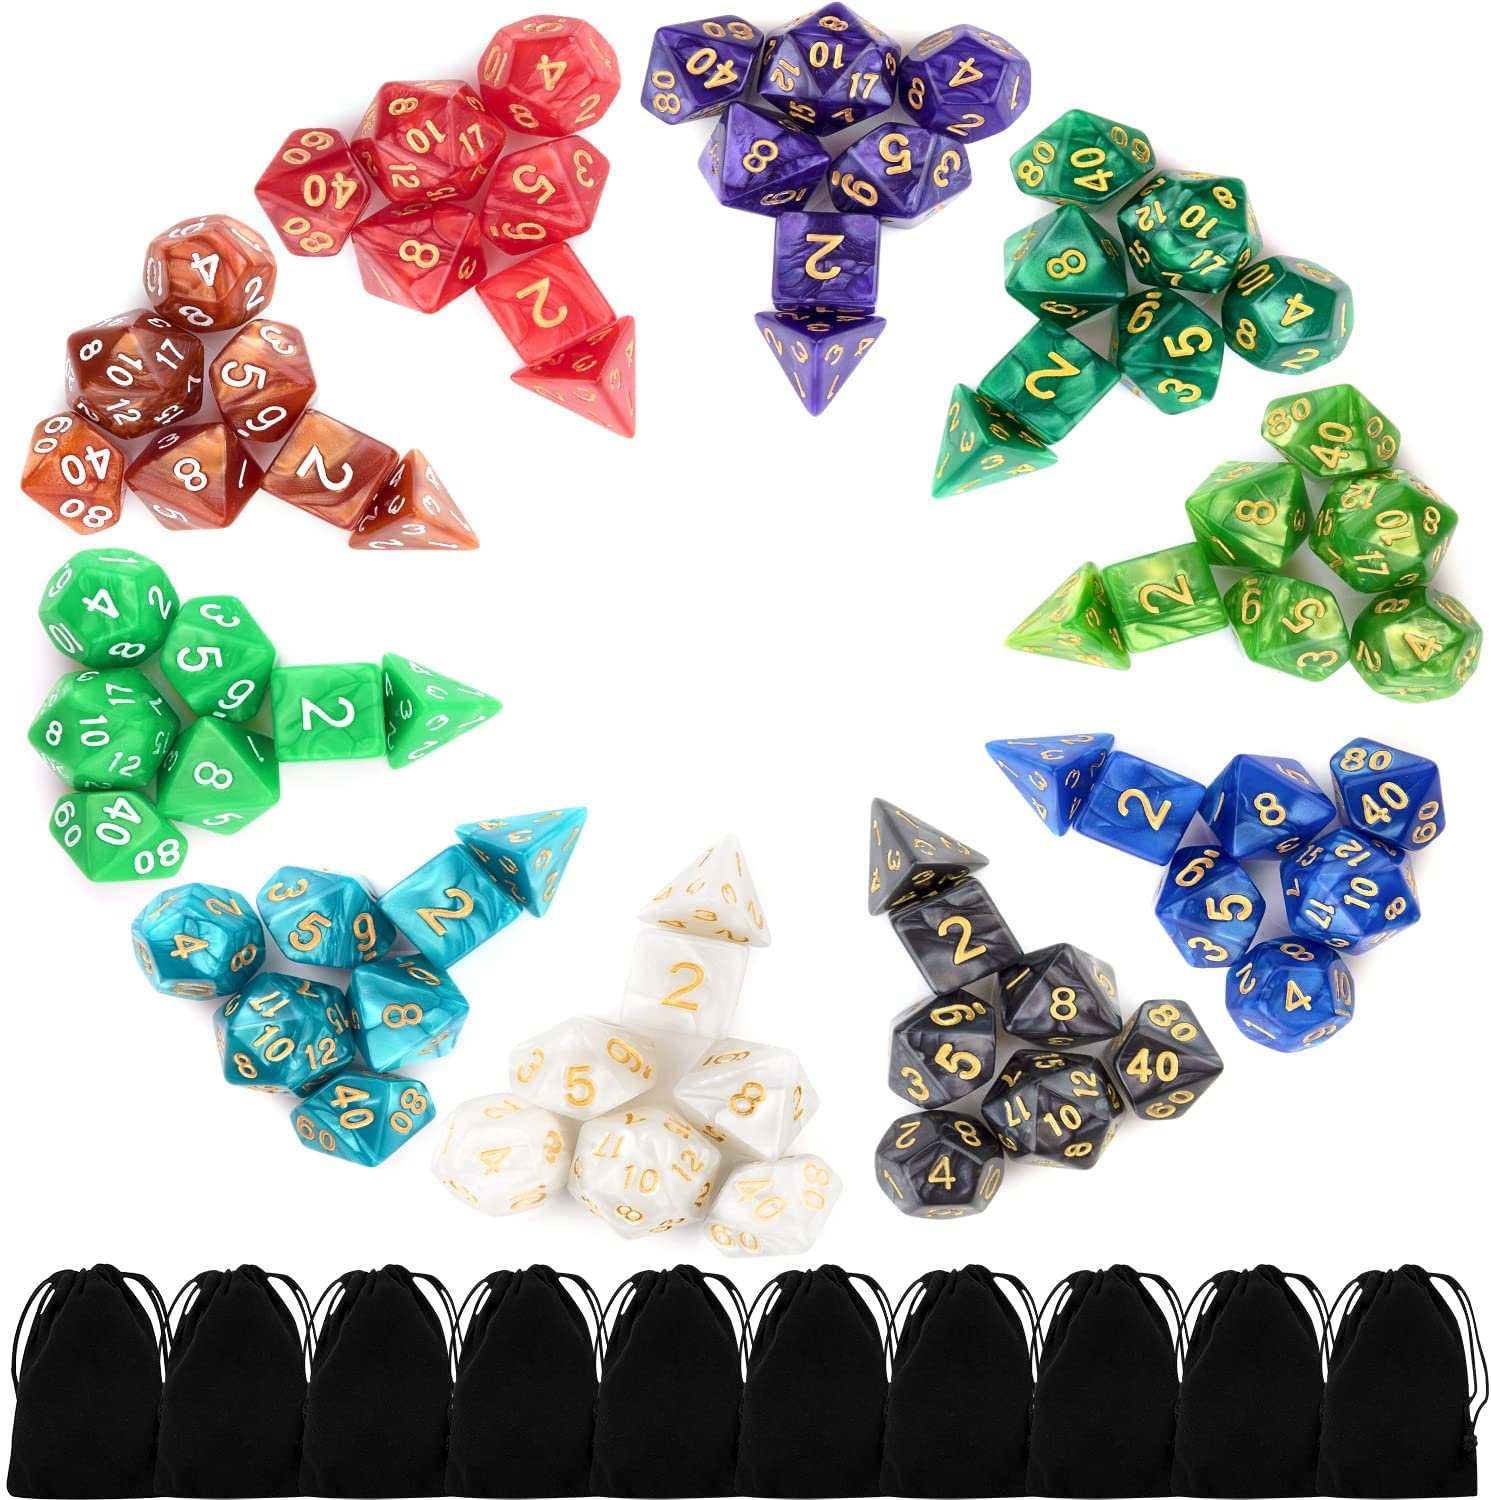 MagiDeal 10x D8 Polyhedral Dice 8 Dadi a denti per Dungeons and Dragons 